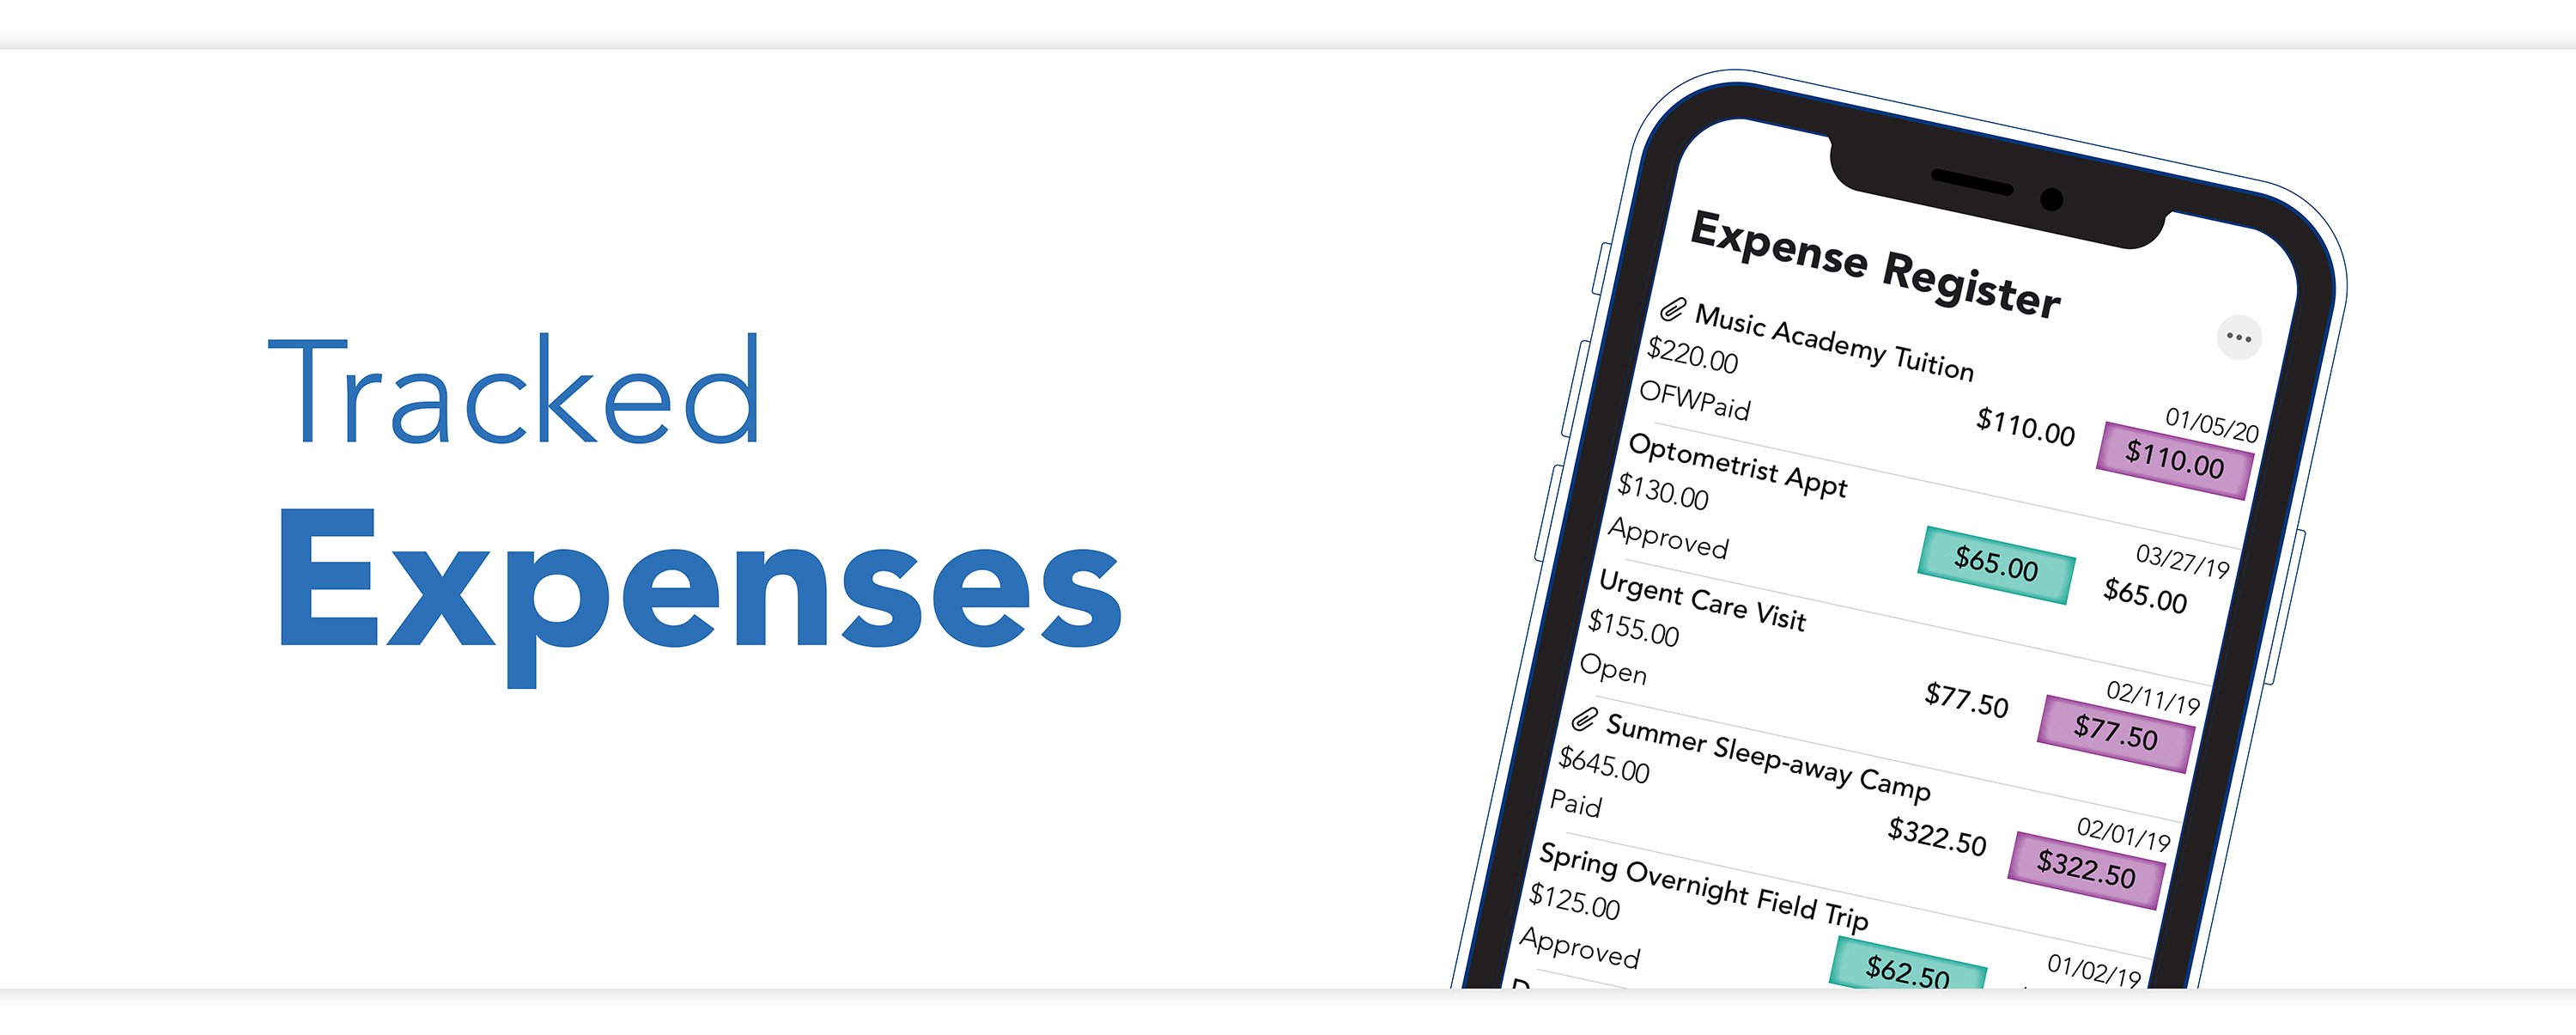 Track expenses, send payments, upload receipts in the expense register on the OFW co-parenting app.